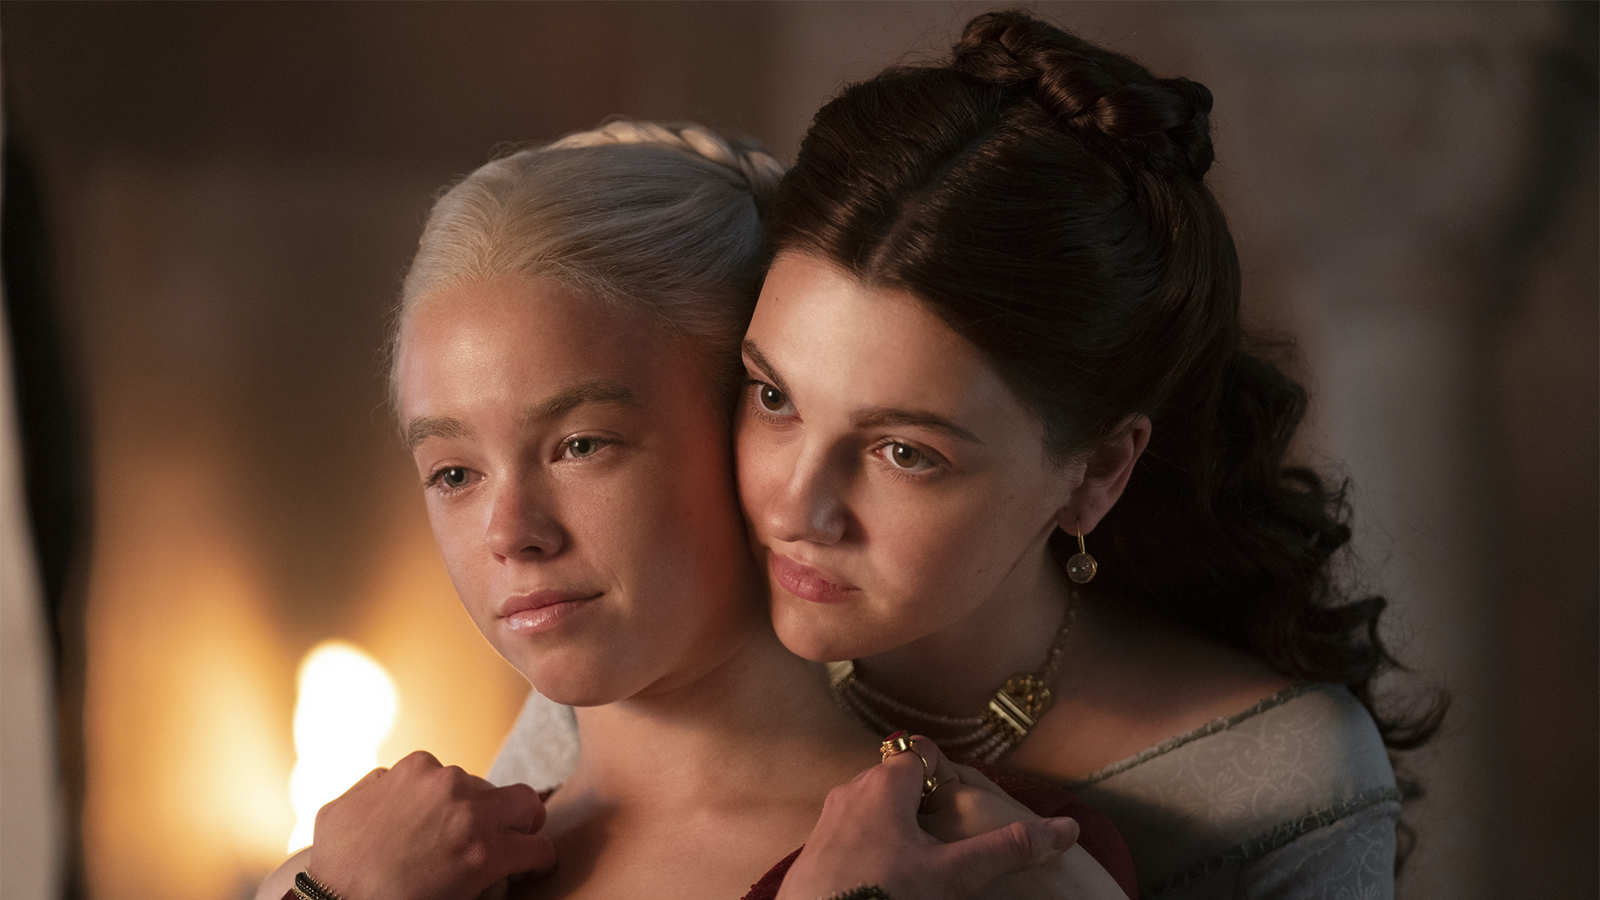 Milly Alcock as young Rhaenyra and Emily Carey as young Alicent in HBO’s ‘House of the Dragon’